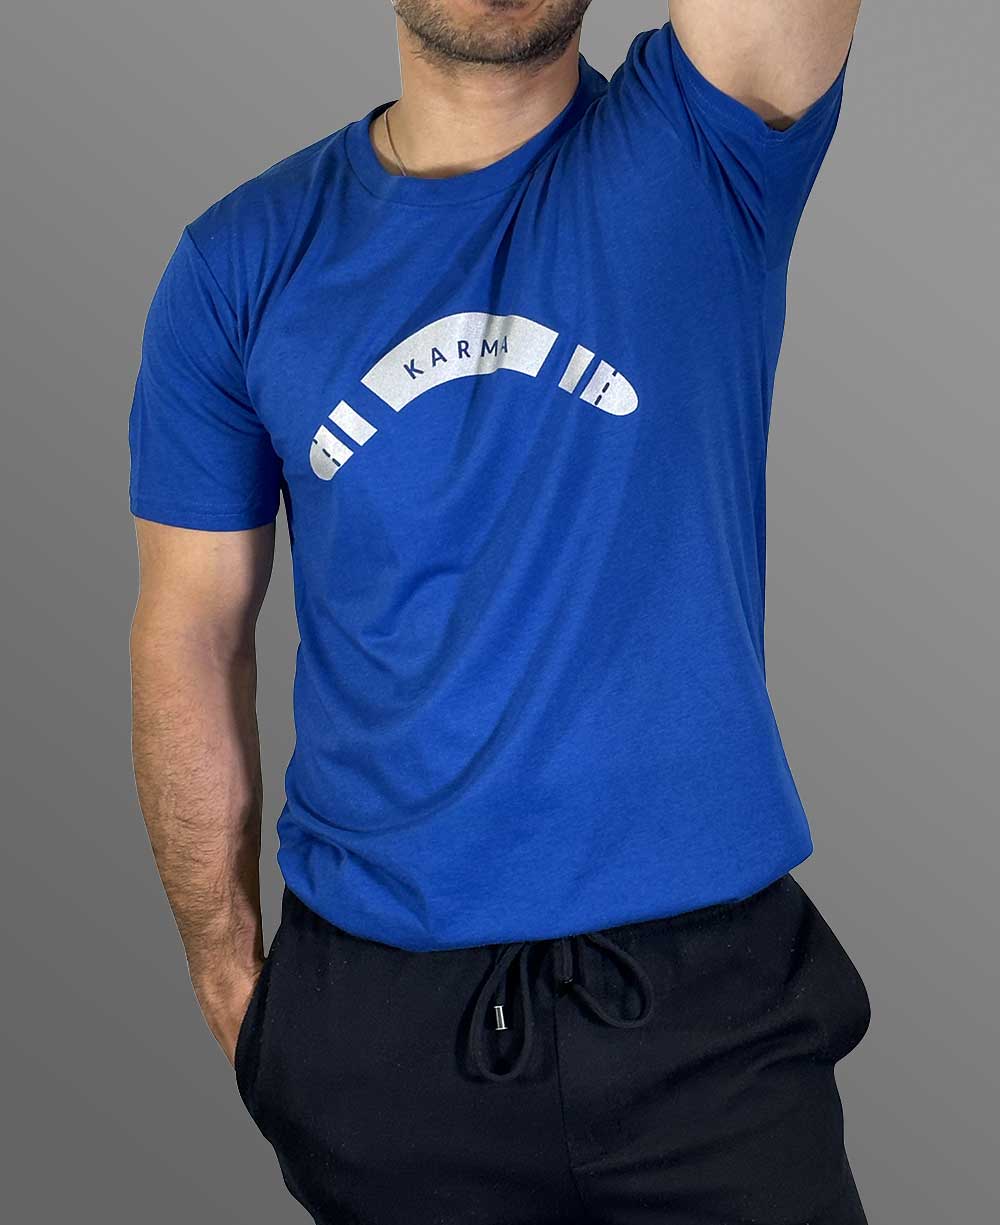 Men’s Karma Organic Cotton And Bamboo Blue T-Shirt, Made in USA - Shirts & Tops S